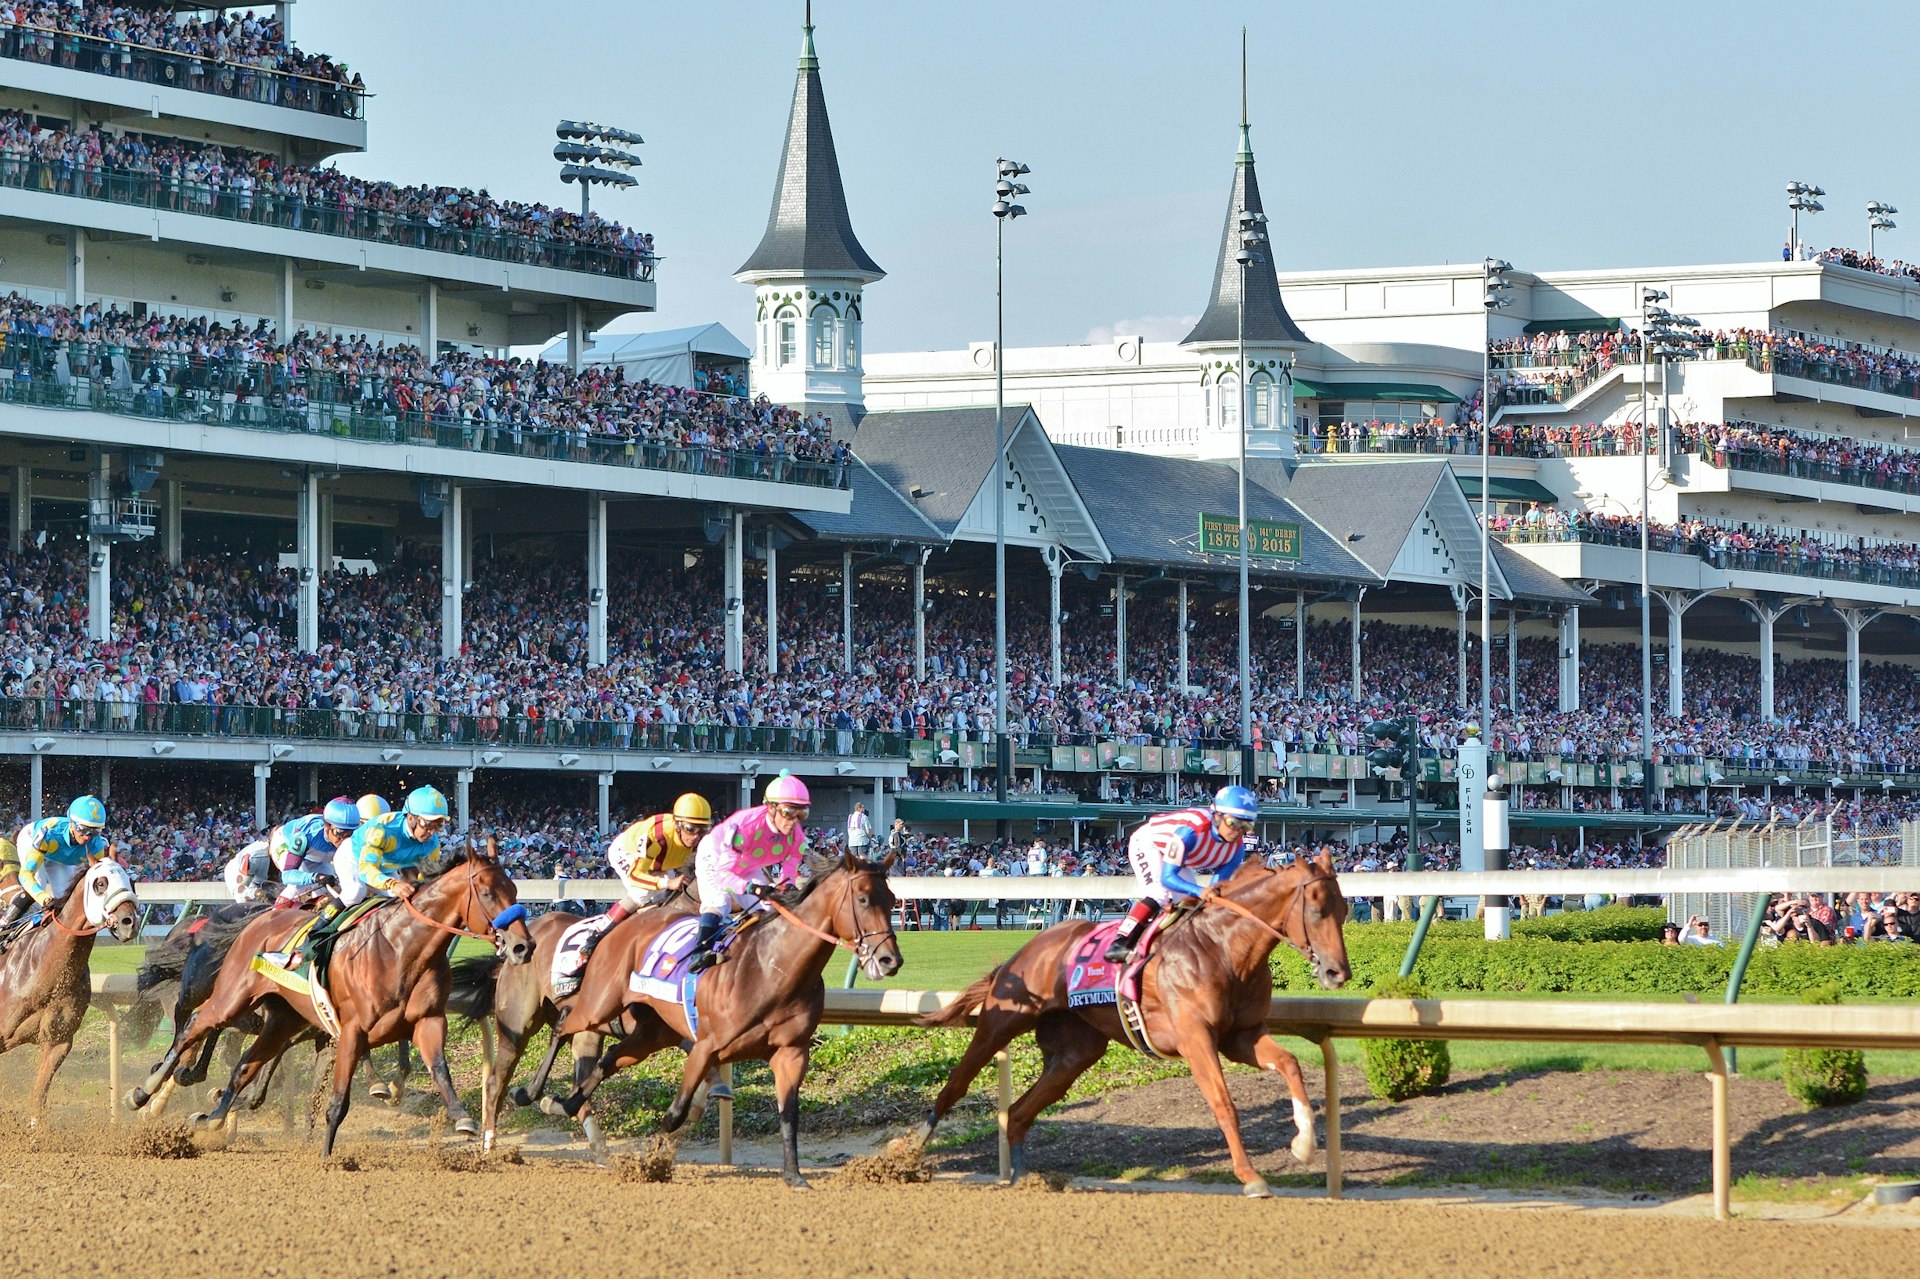 Horses and jockeys taking the first turn at Churchill Downs in Louisville, Kentucky